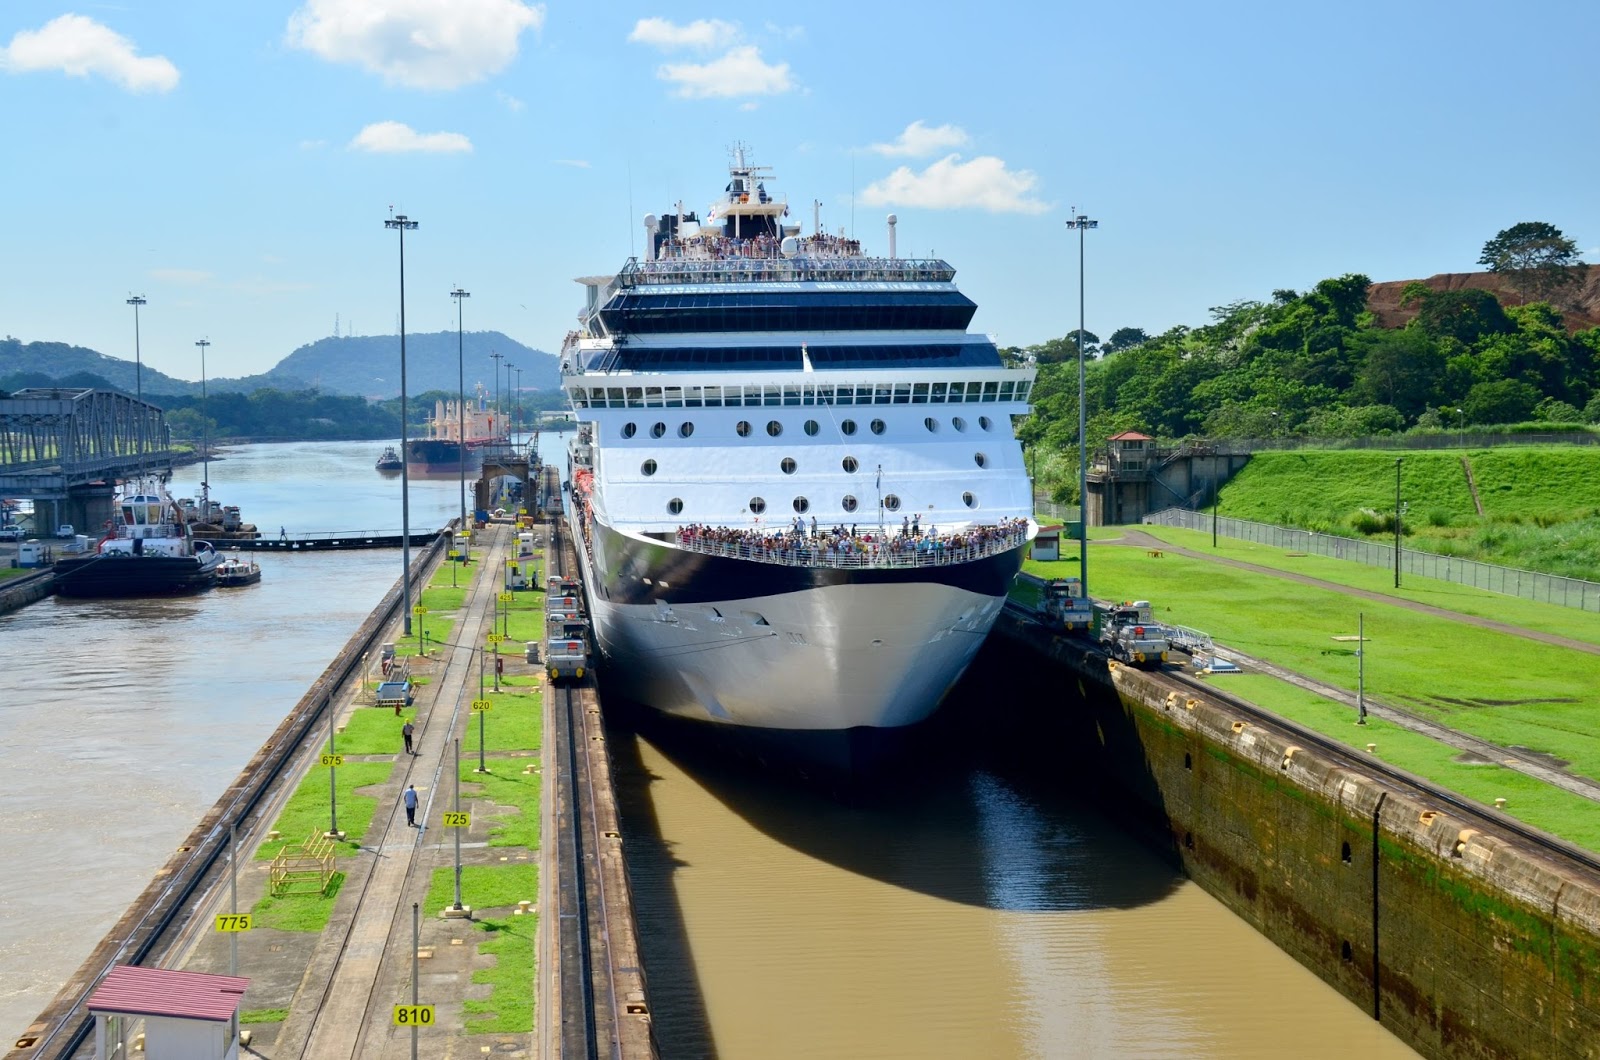 Panama canal delays implementation of draft restrictions for ship transits. (Photo Internet reproduction)